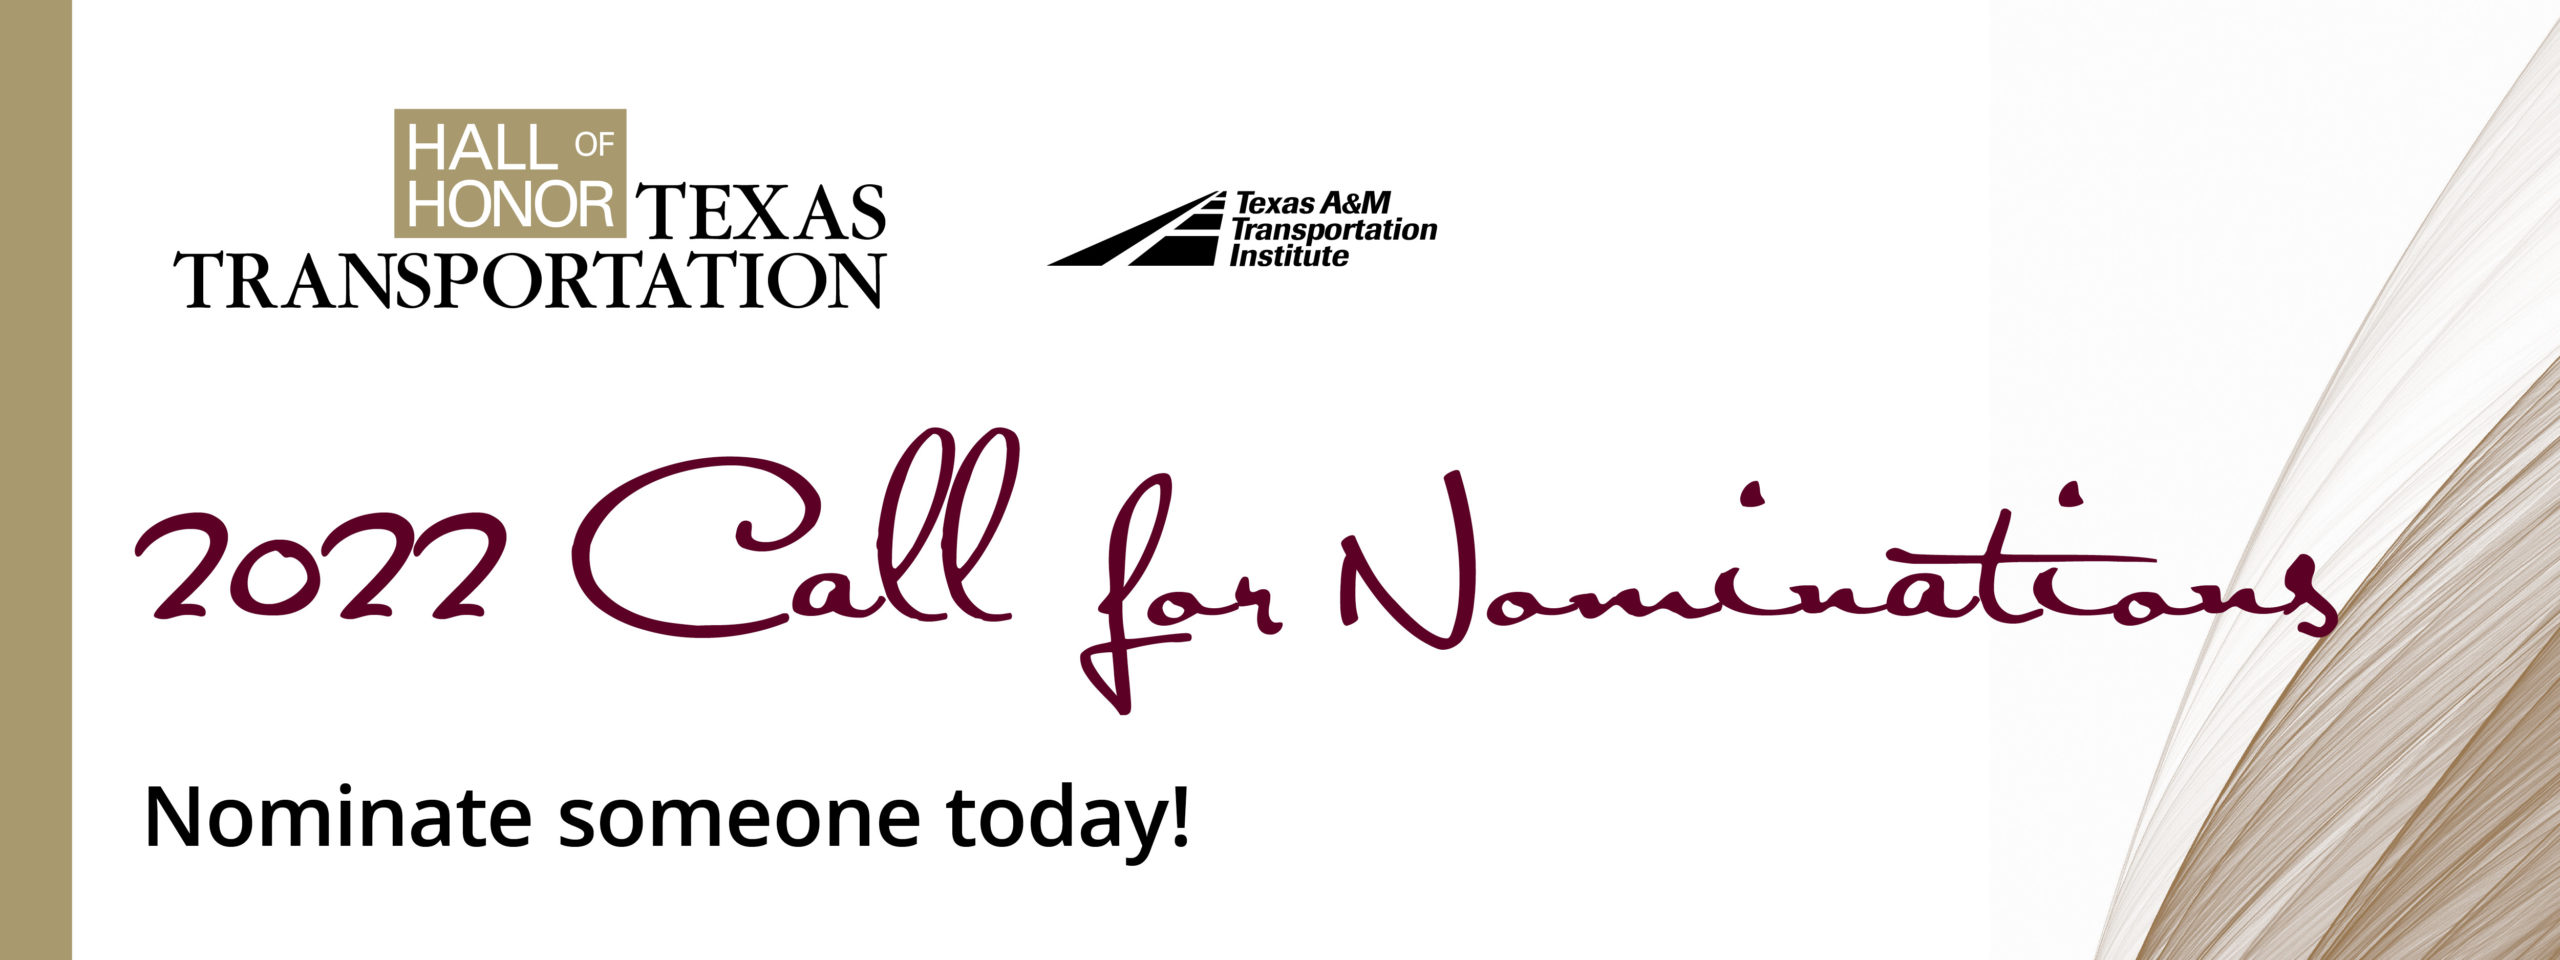 Hall of Honor nominations. Call to action text: nominate someone today.